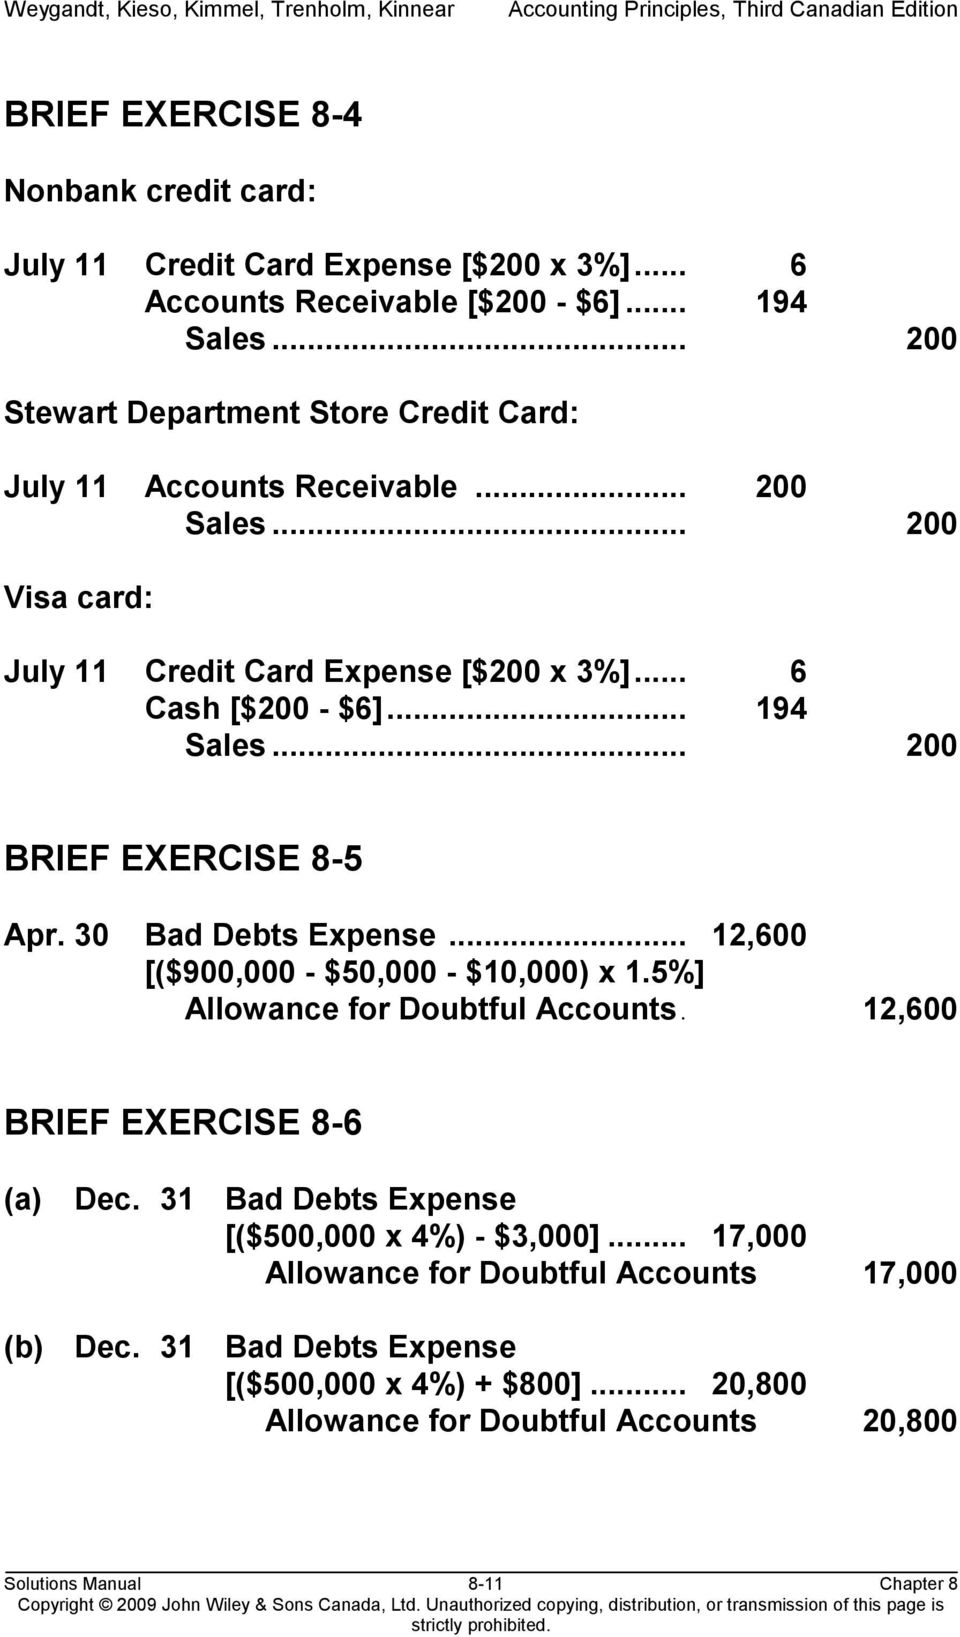 .. 200 BRIEF EXERCISE 8-5 Apr. 30 Bad Debts Expense... 12,600 [($900,000 - $50,000 - $10,000) x 1.5%] Allowance for Doubtful Accounts. 12,600 BRIEF EXERCISE 8-6 (a) Dec.